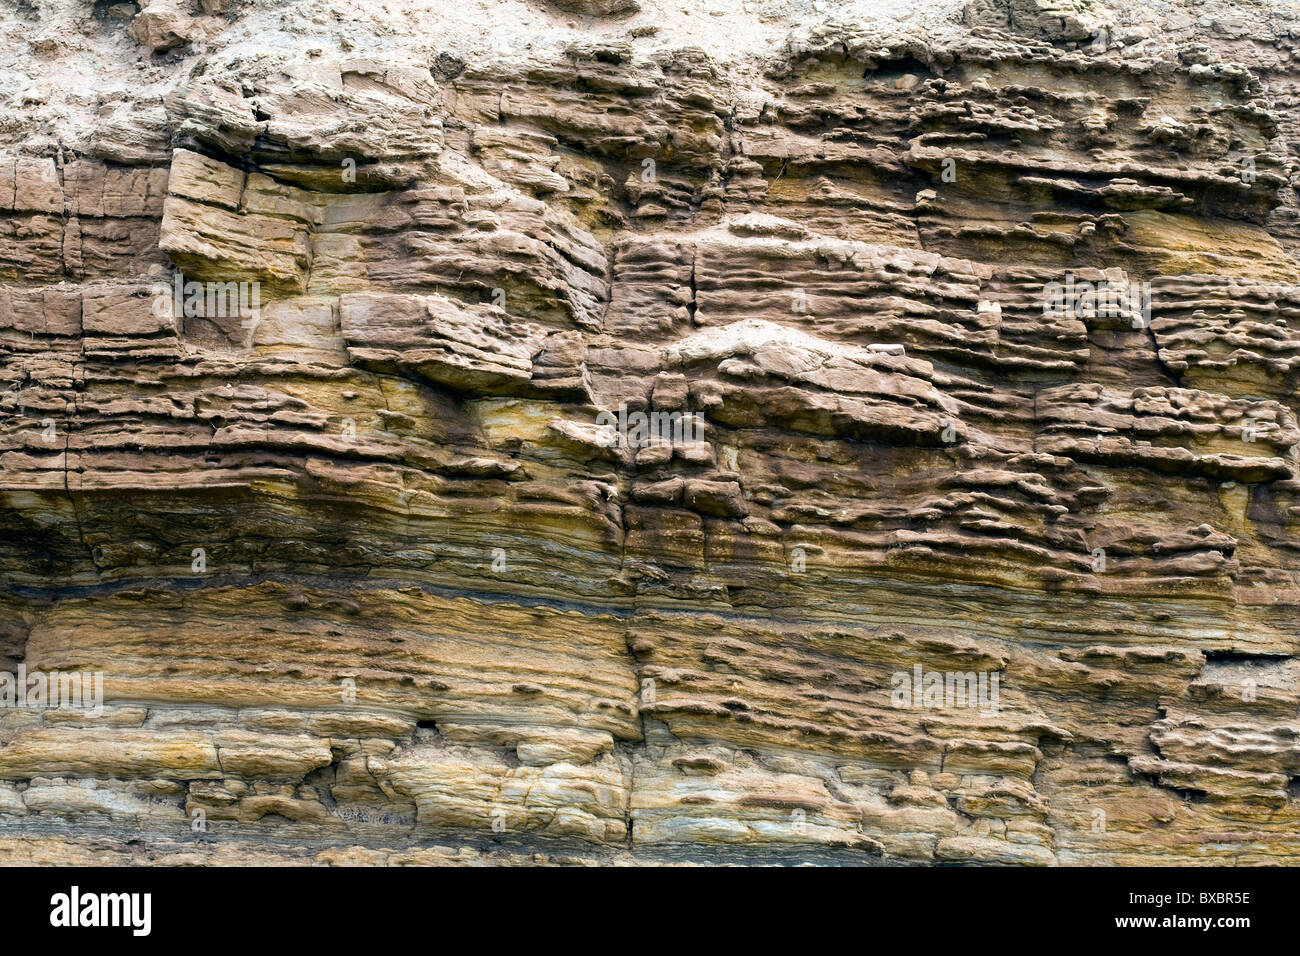 Sandstone rock strata on a small cliff south of Craster Northumberland England Stock Photo